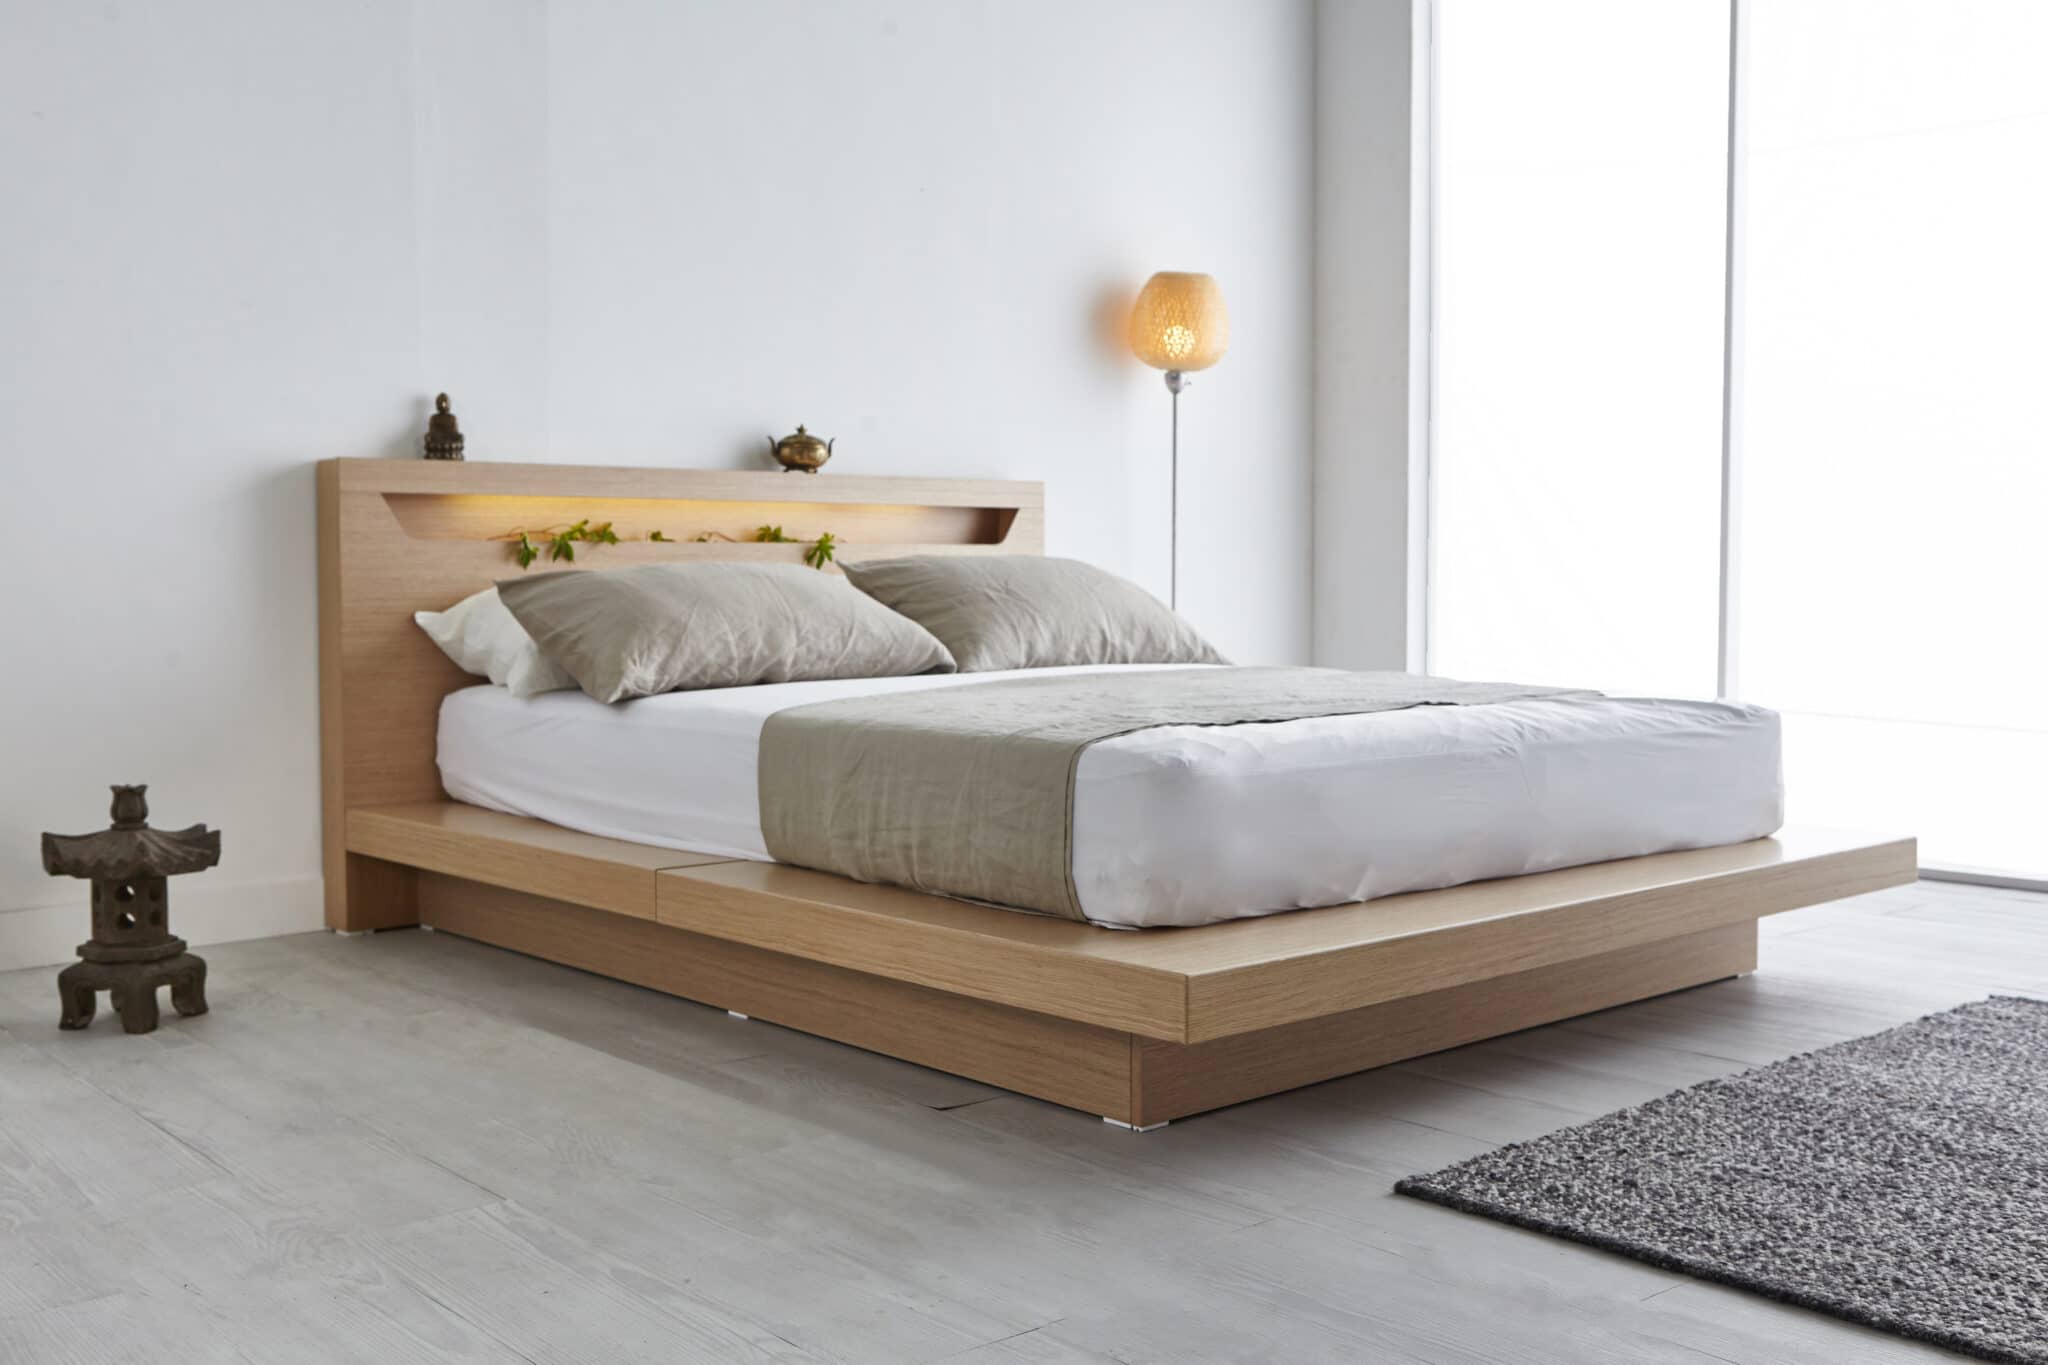 Best Wood Bed Frame Top 9 Wooden Beds, Bed With Frame On Top